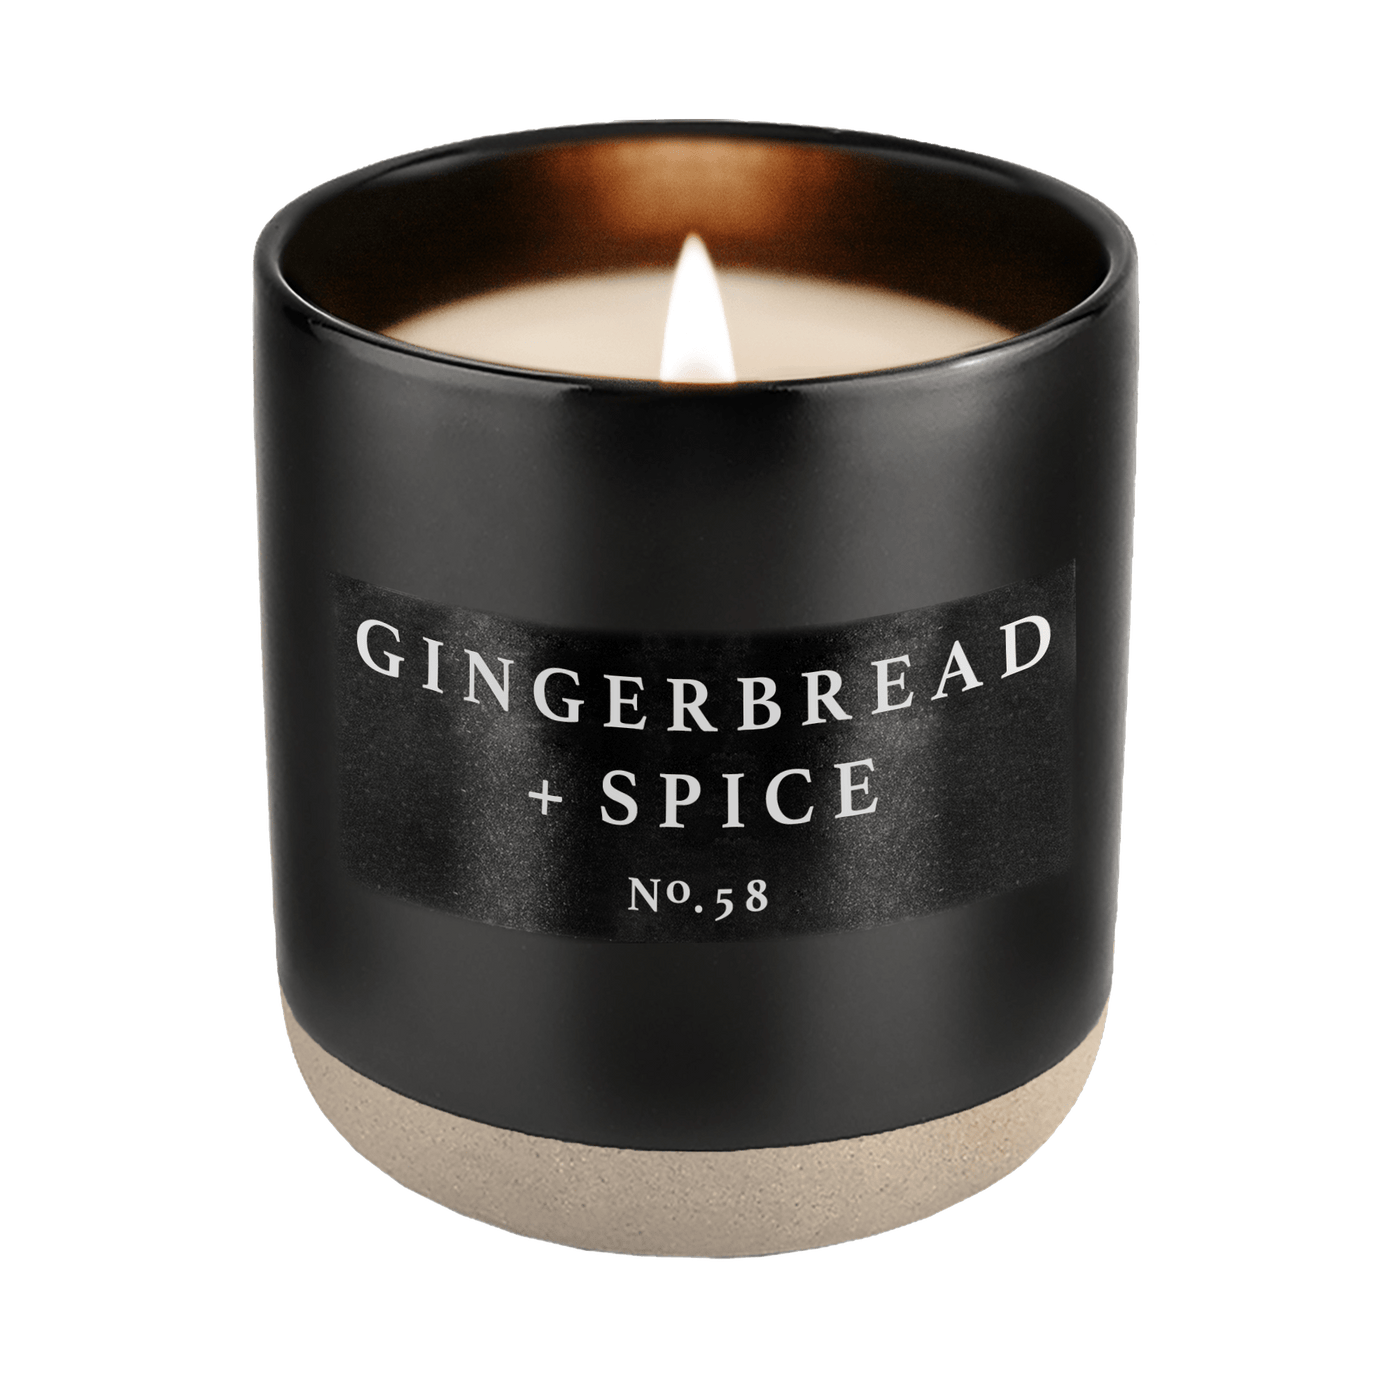 Gingerbread and Spice Soy Candle - Black Stoneware Jar - 12 oz - Sweet Water Decor - Candles